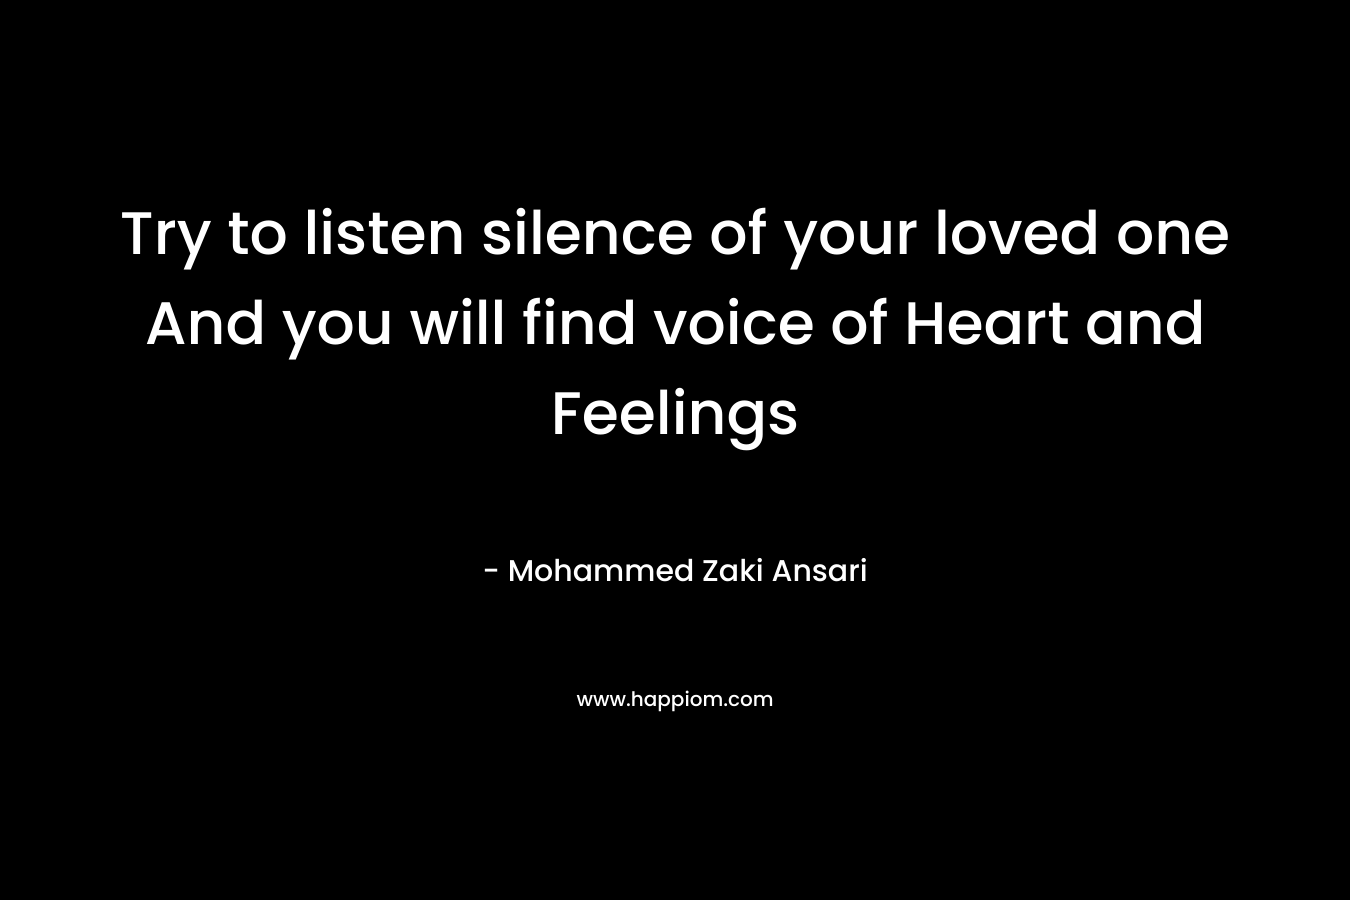 Try to listen silence of your loved one And you will find voice of Heart and Feelings